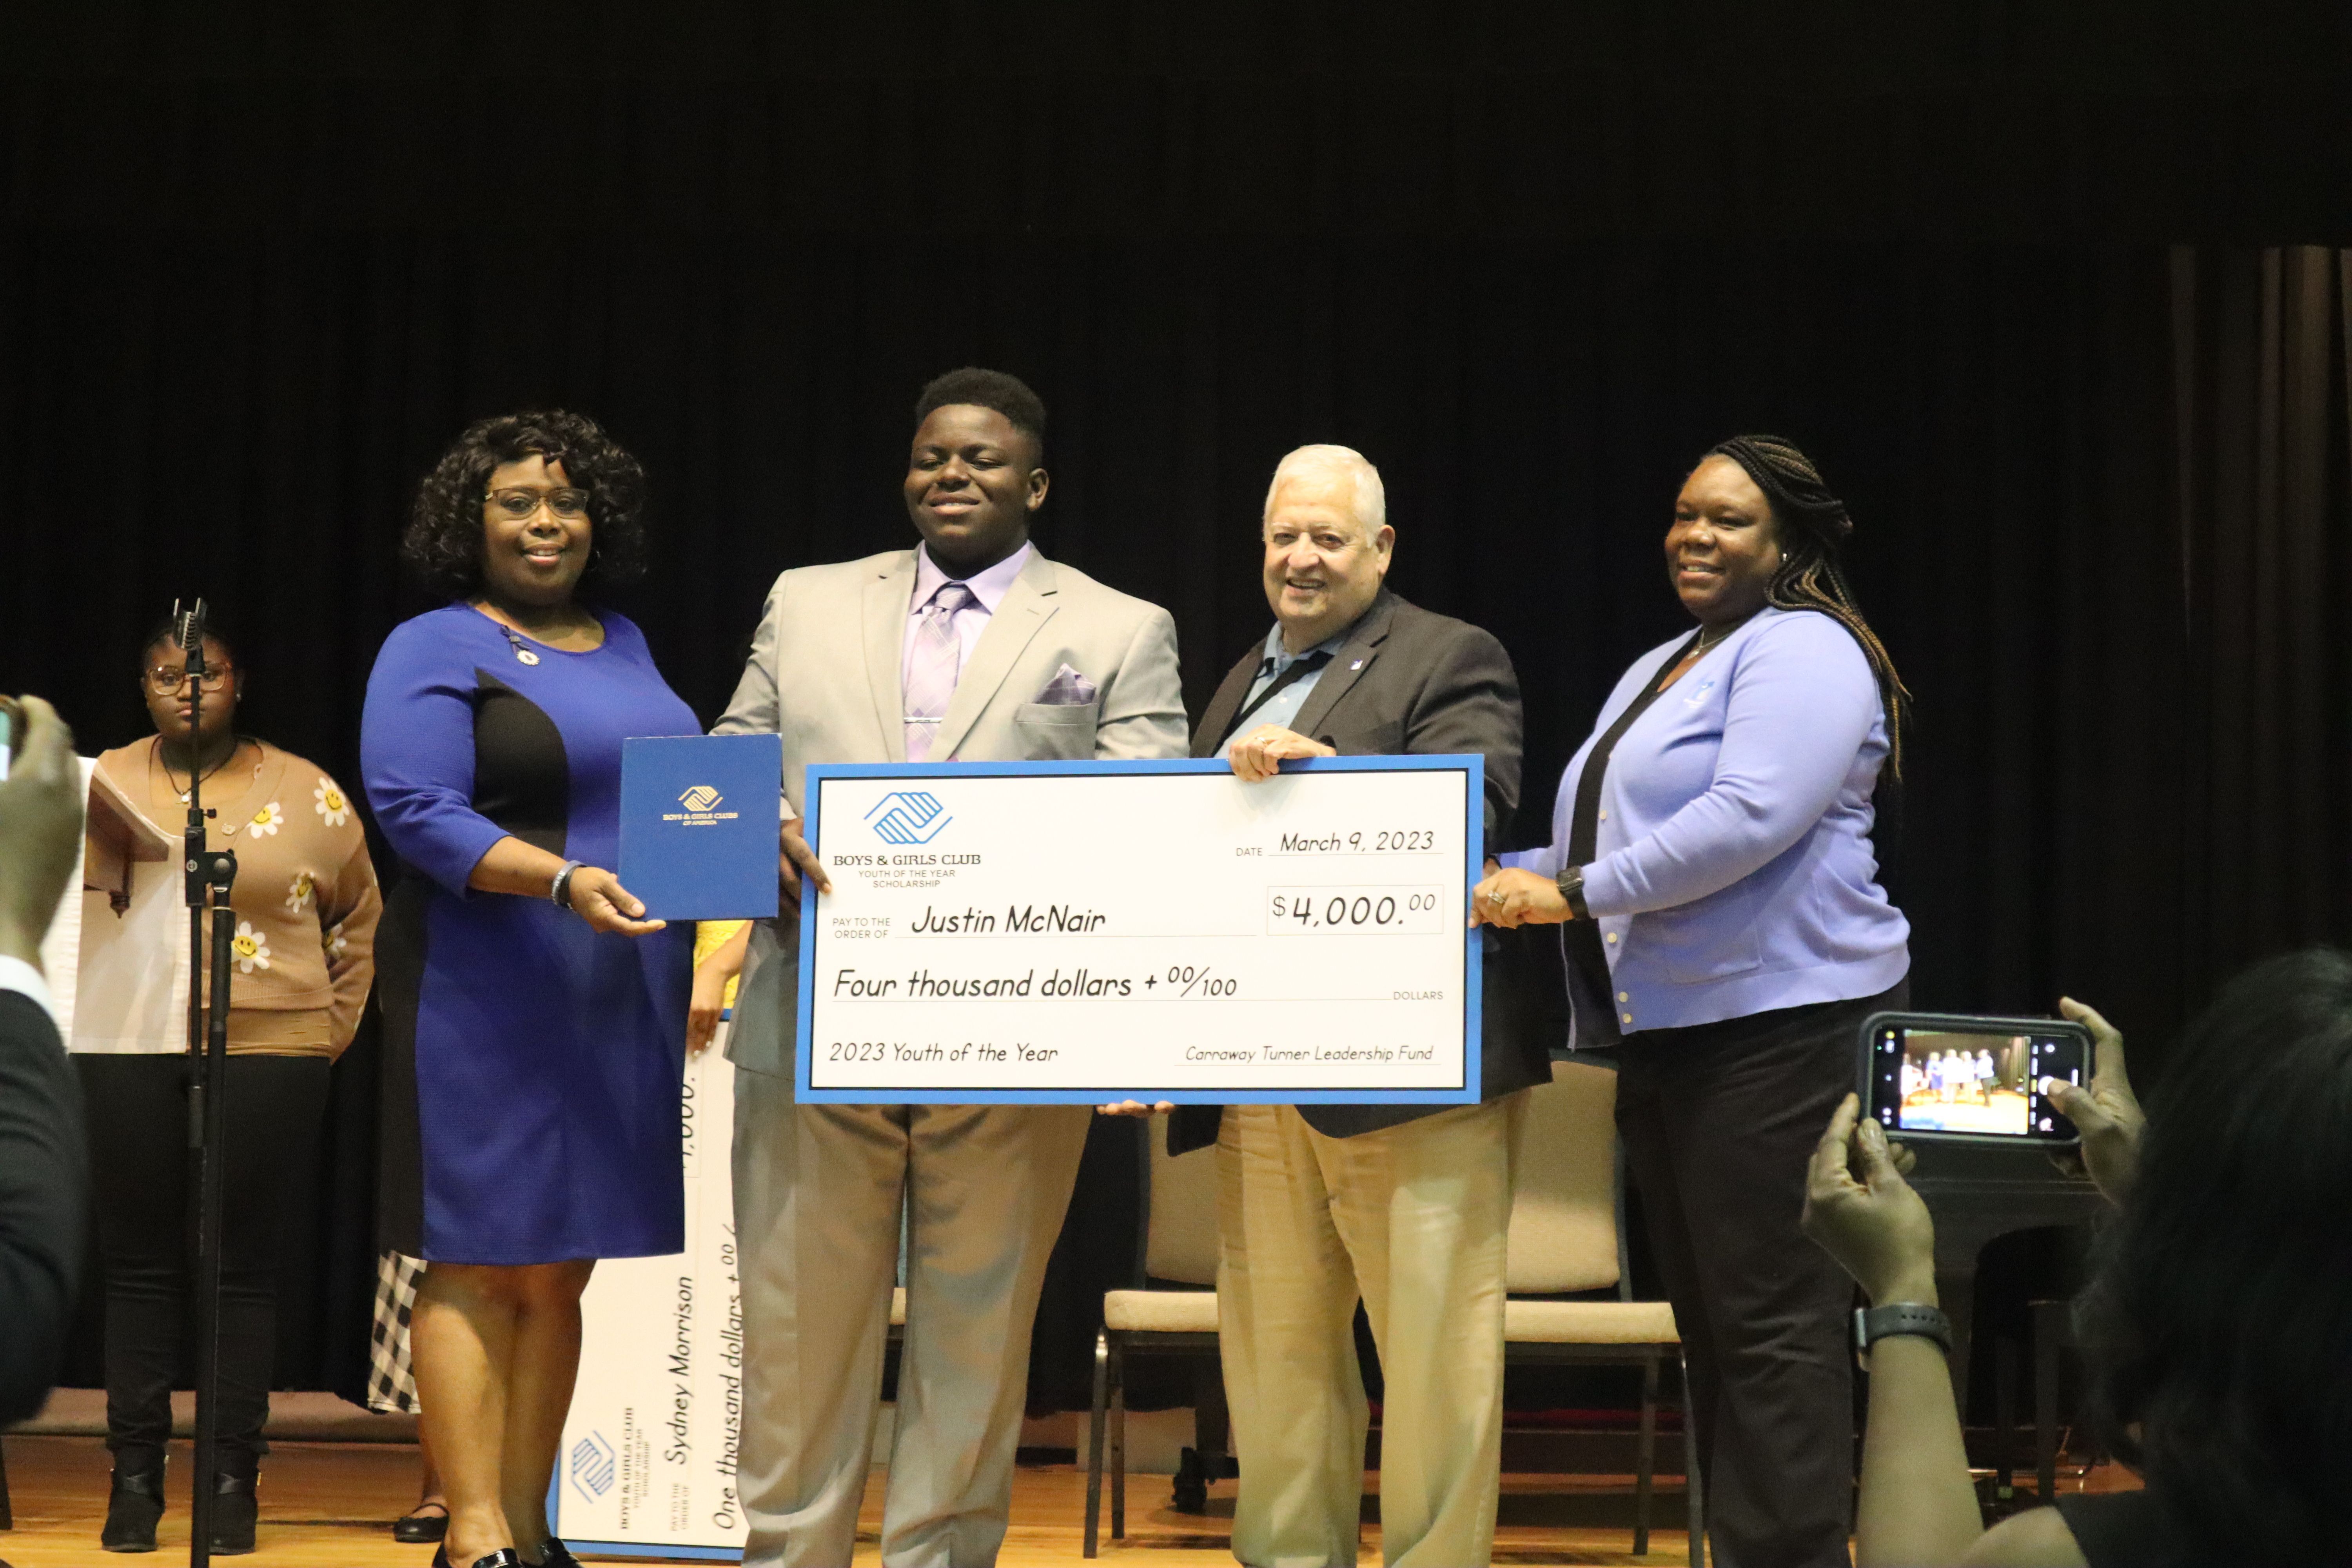 Justin McNair accepts a $4,000 scholarship from The Carraway Turner Leadership Fund.